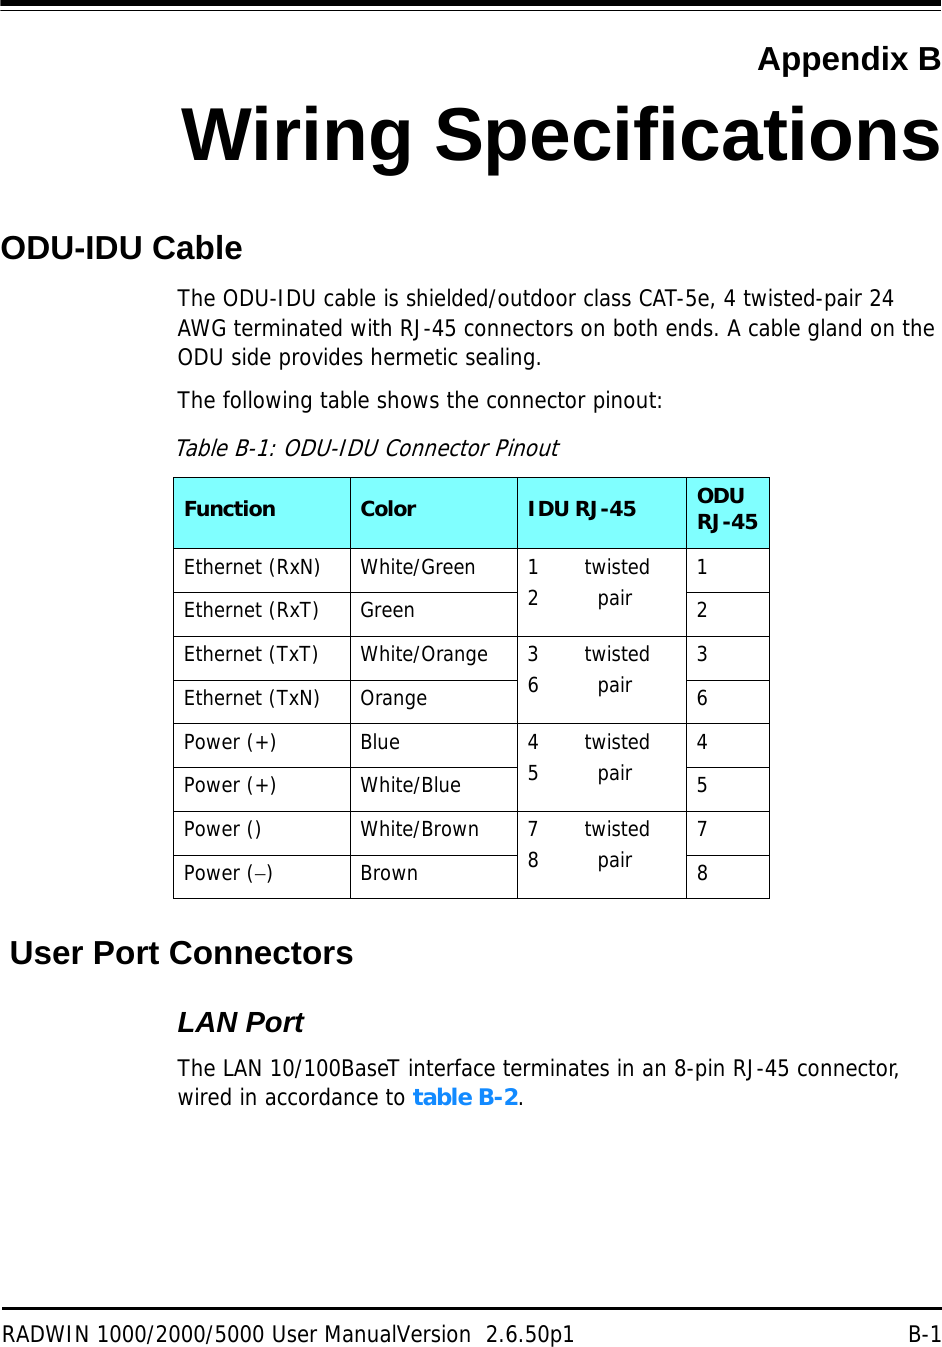 RADWIN 1000/2000/5000 User ManualVersion  2.6.50p1 B-1Appendix BWiring SpecificationsODU-IDU CableThe ODU-IDU cable is shielded/outdoor class CAT-5e, 4 twisted-pair 24 AWG terminated with RJ-45 connectors on both ends. A cable gland on the ODU side provides hermetic sealing.The following table shows the connector pinout: User Port ConnectorsLAN PortThe LAN 10/100BaseT interface terminates in an 8-pin RJ-45 connector, wired in accordance to table B-2.Table B-1: ODU-IDU Connector PinoutFunction Color IDU RJ-45 ODU RJ-45Ethernet (RxN) White/Green 1       twisted2         pair 1 Ethernet (RxT) Green 2 Ethernet (TxT) White/Orange 3       twisted6         pair 3 Ethernet (TxN) Orange 6 Power (+) Blue 4       twisted5         pair 4 Power (+) White/Blue 5 Power () White/Brown 7       twisted8         pair 7 Power ()Brown 8 